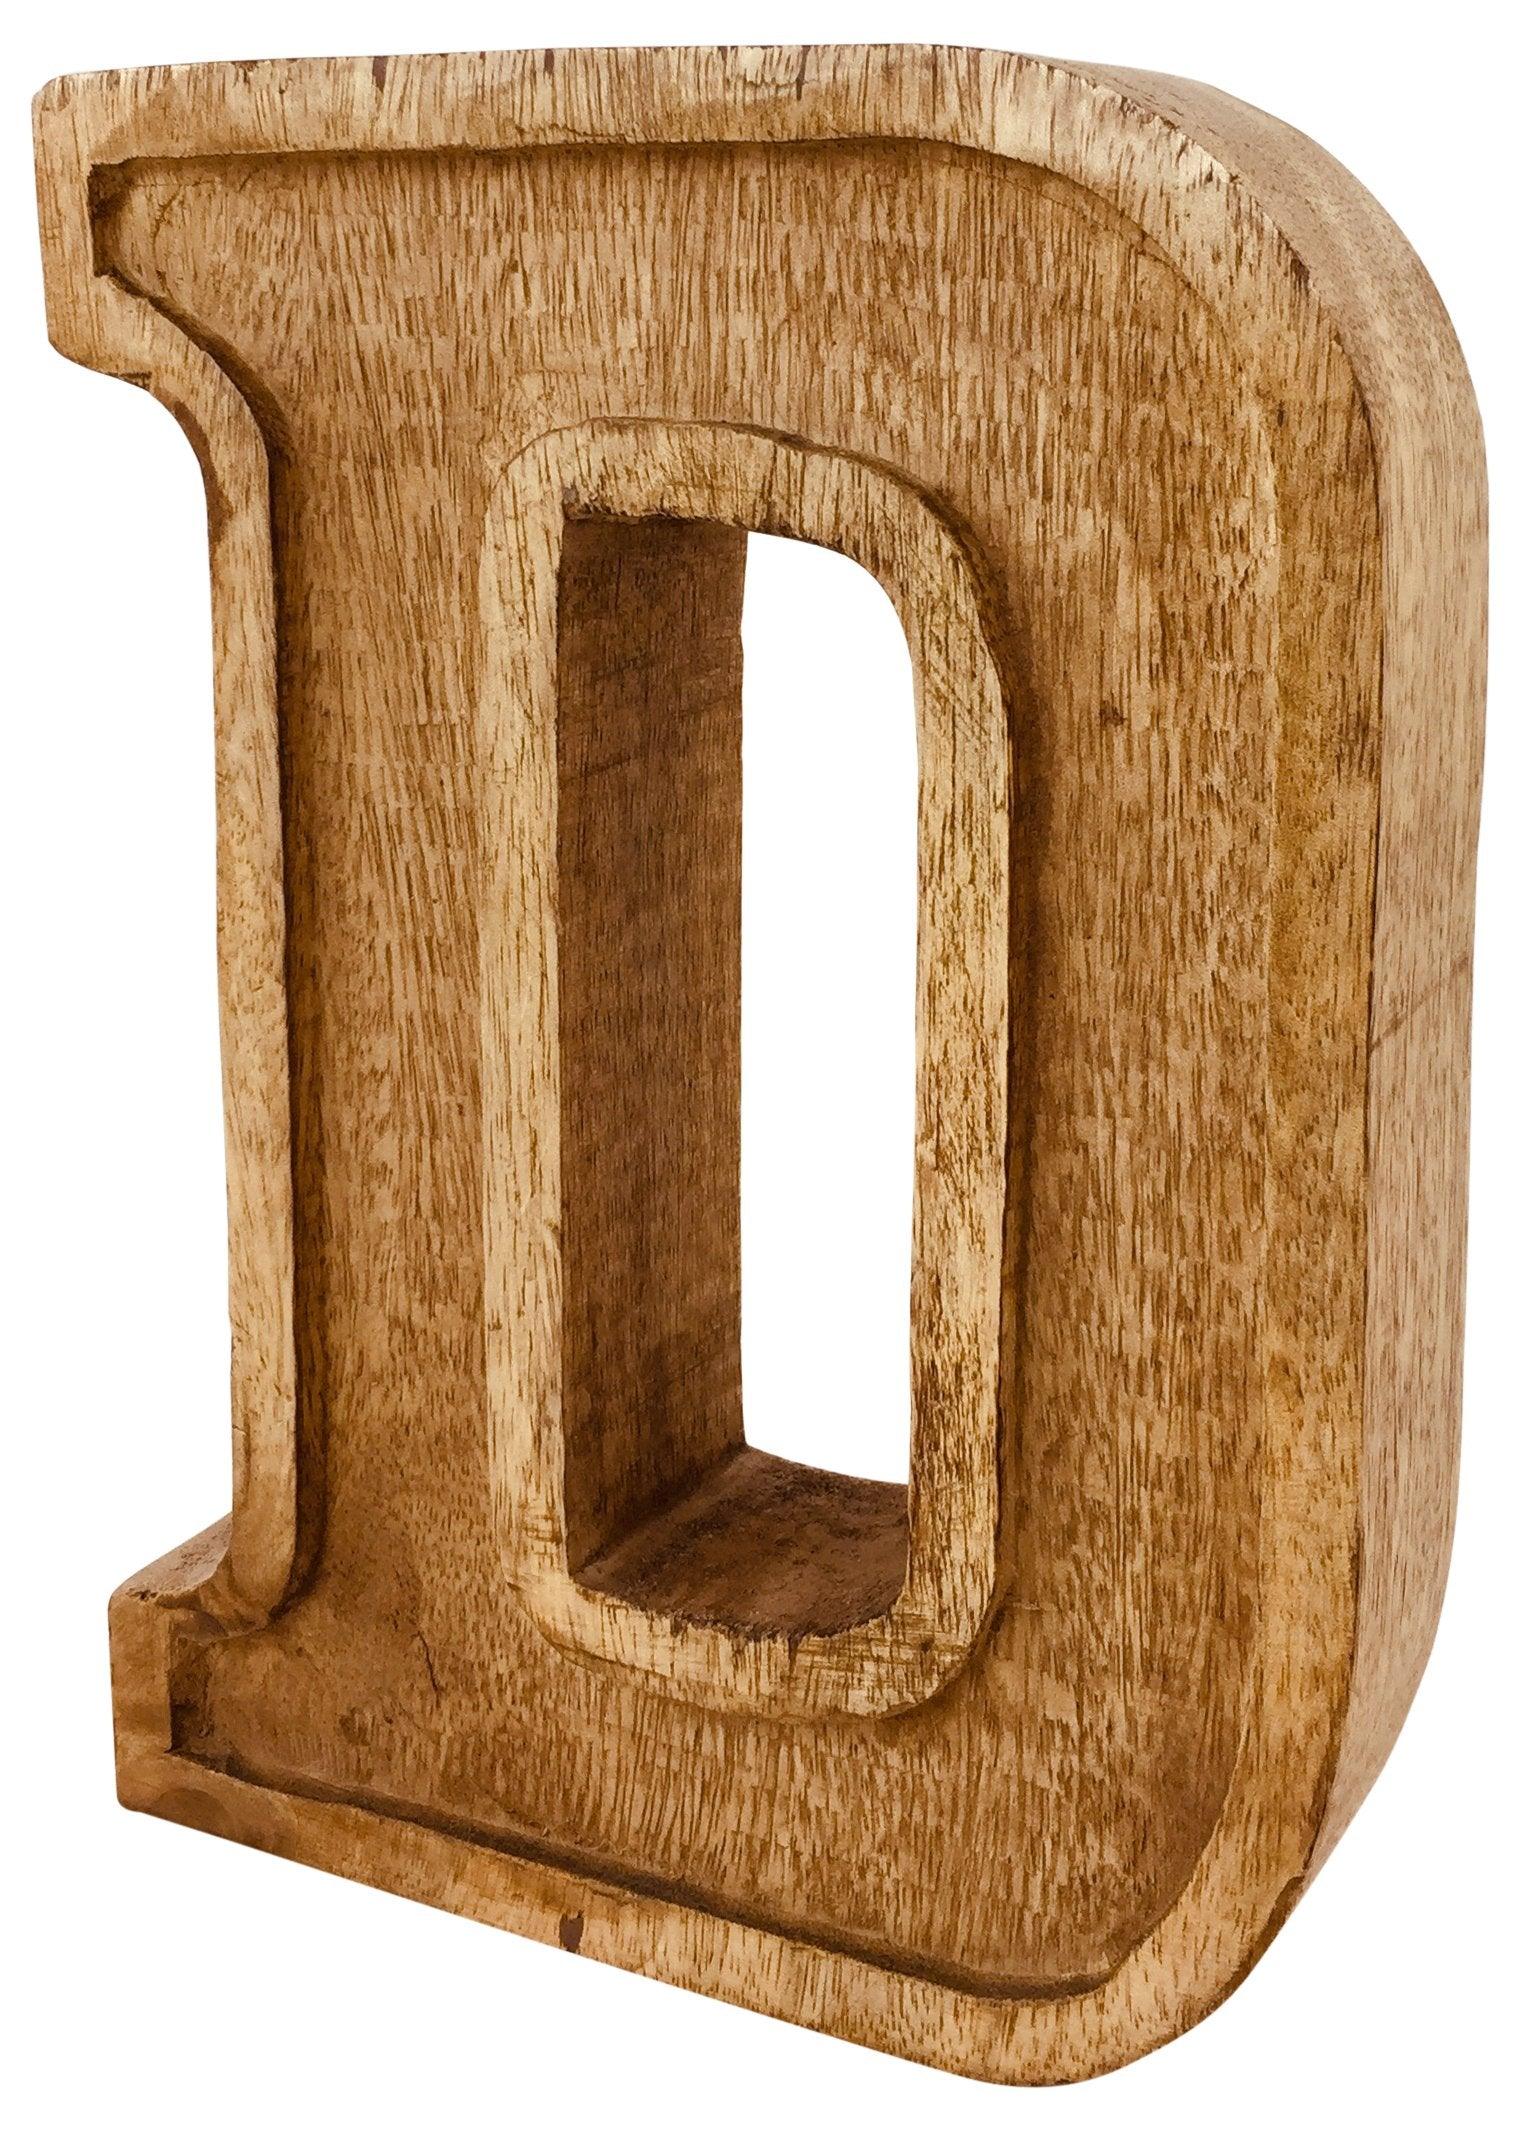 View Hand Carved Wooden Embossed Letter D information